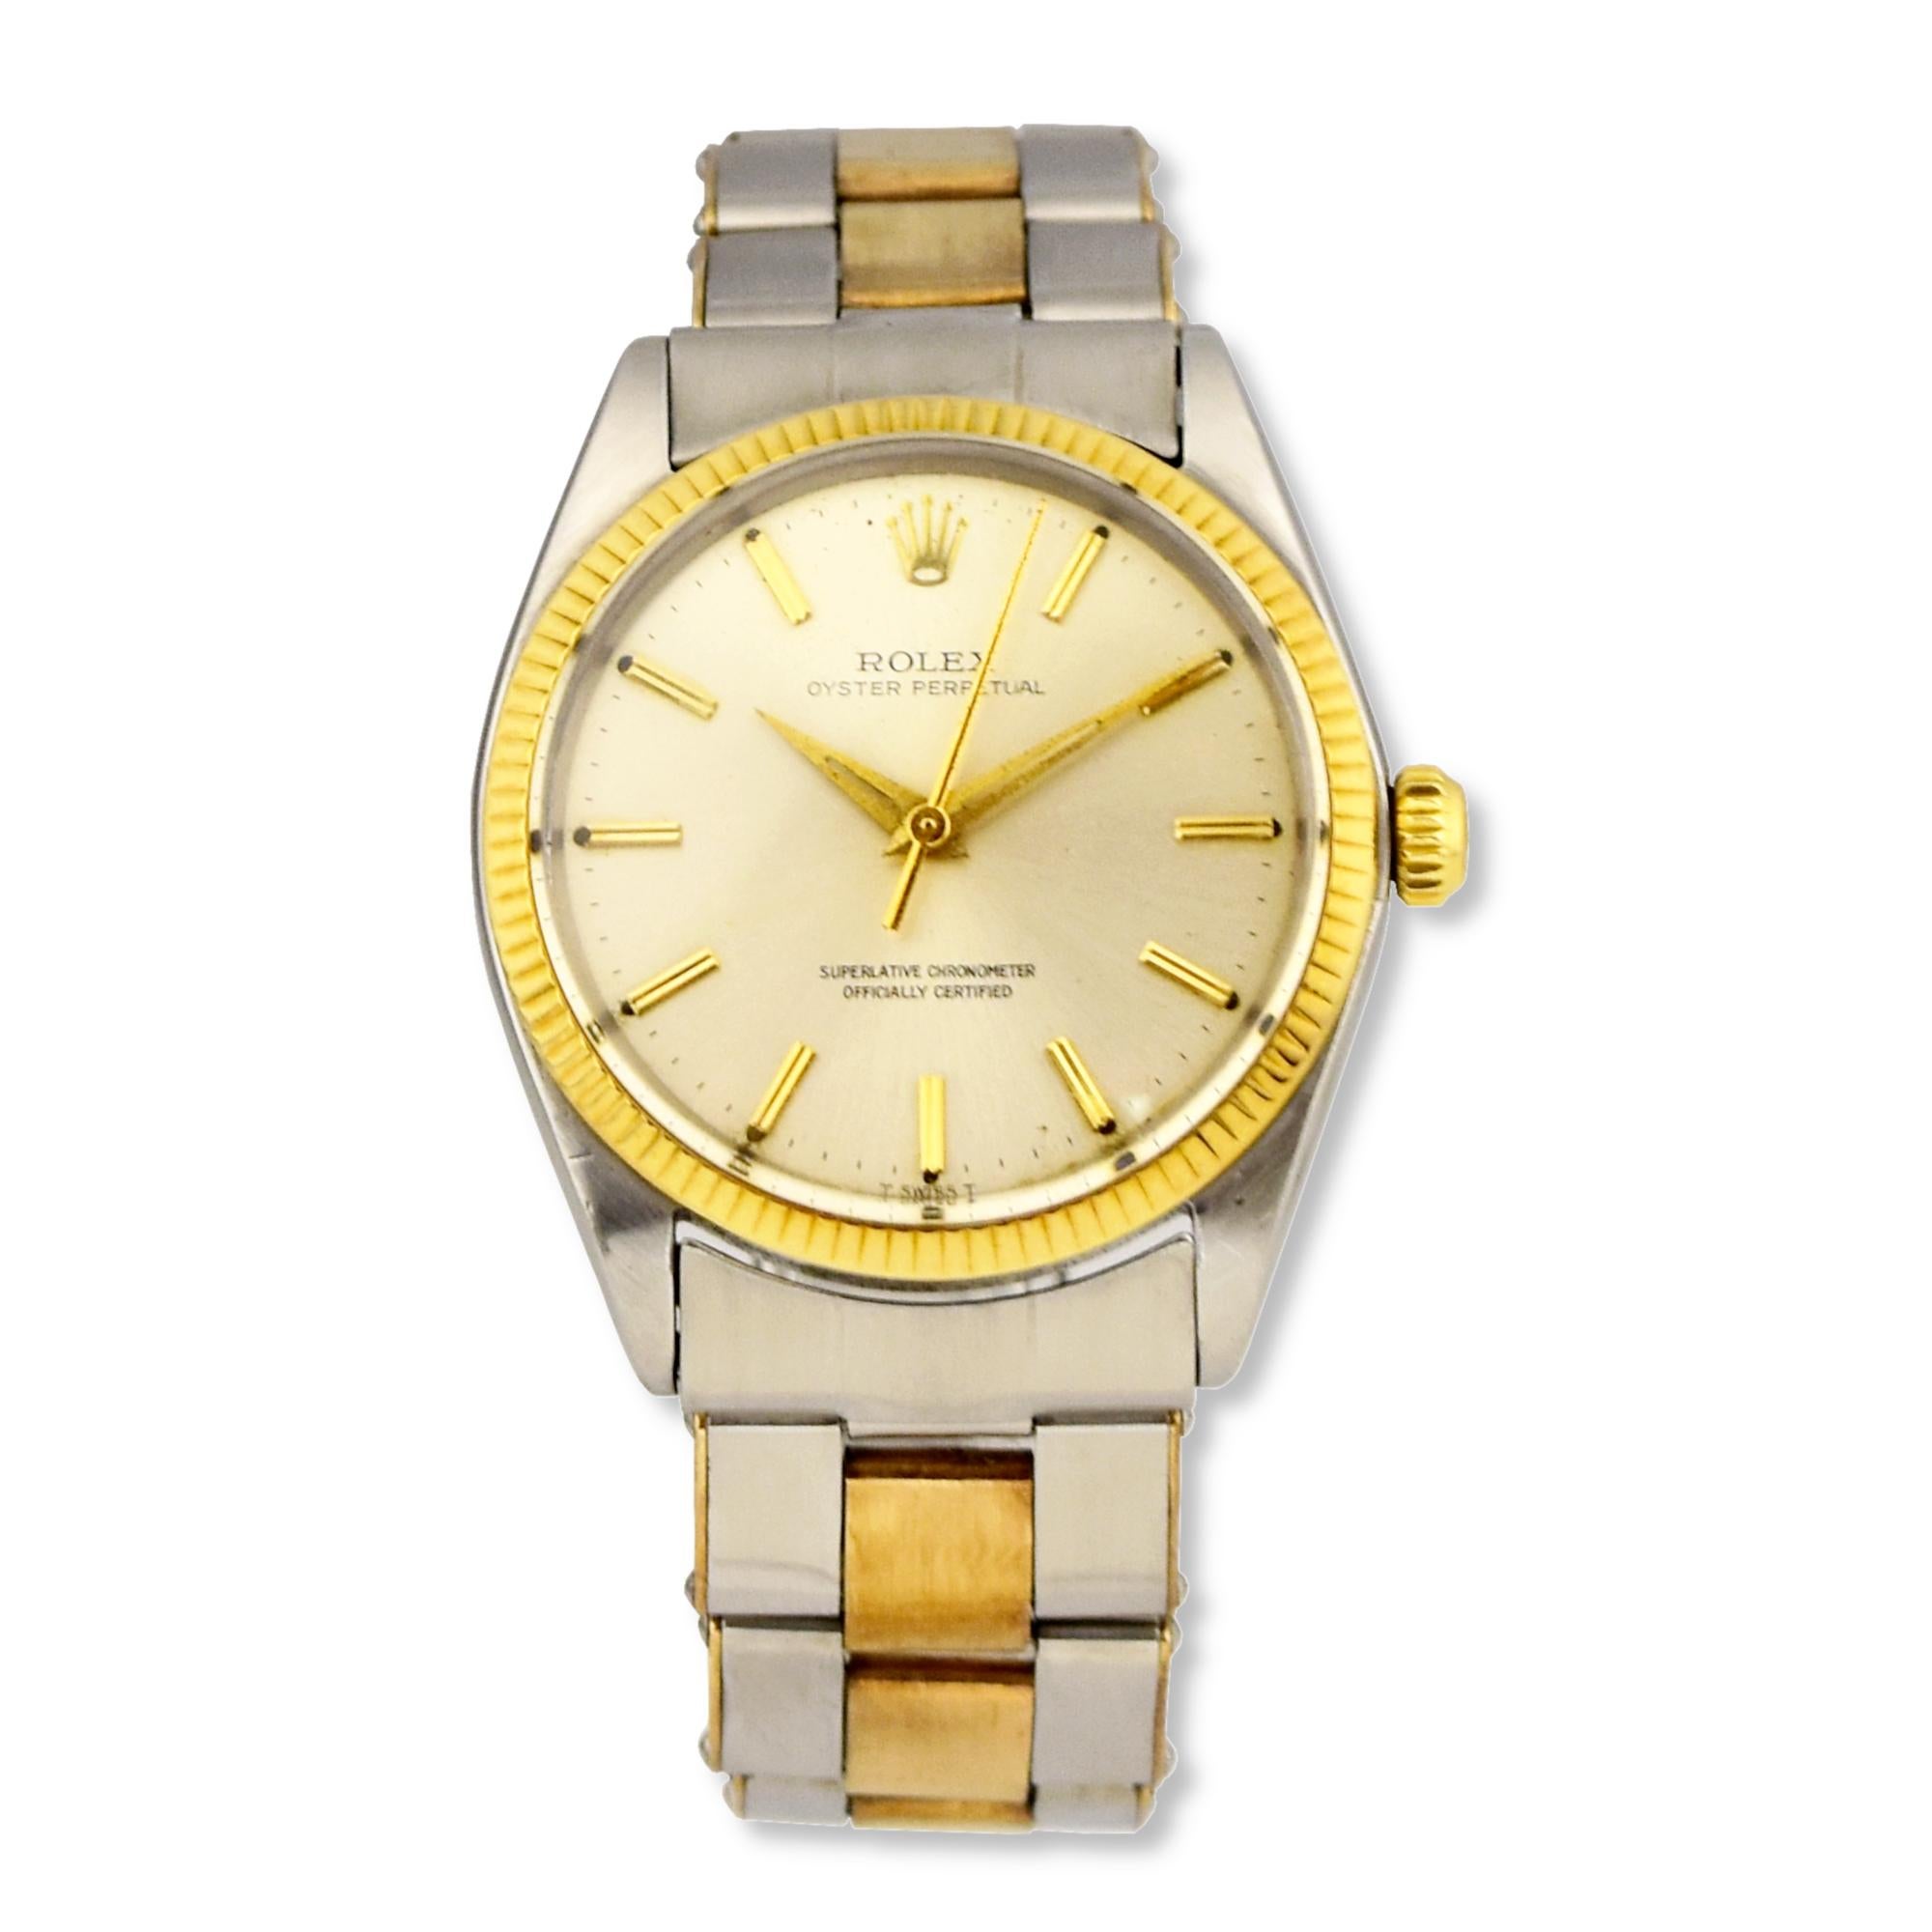 Brand: Rolex
Model Name: Oyster Perpetual
Model Number:  1005
Movement: Automatic
Case Size: 34 mm
Case Back: Solid
Case Material: Stainless Steel; Yellow Gold
Bezel: Yellow Gold
Dial: Silver
Bracelet:  Oyster; Yellow Gold; Steel
Hour Markers: Non